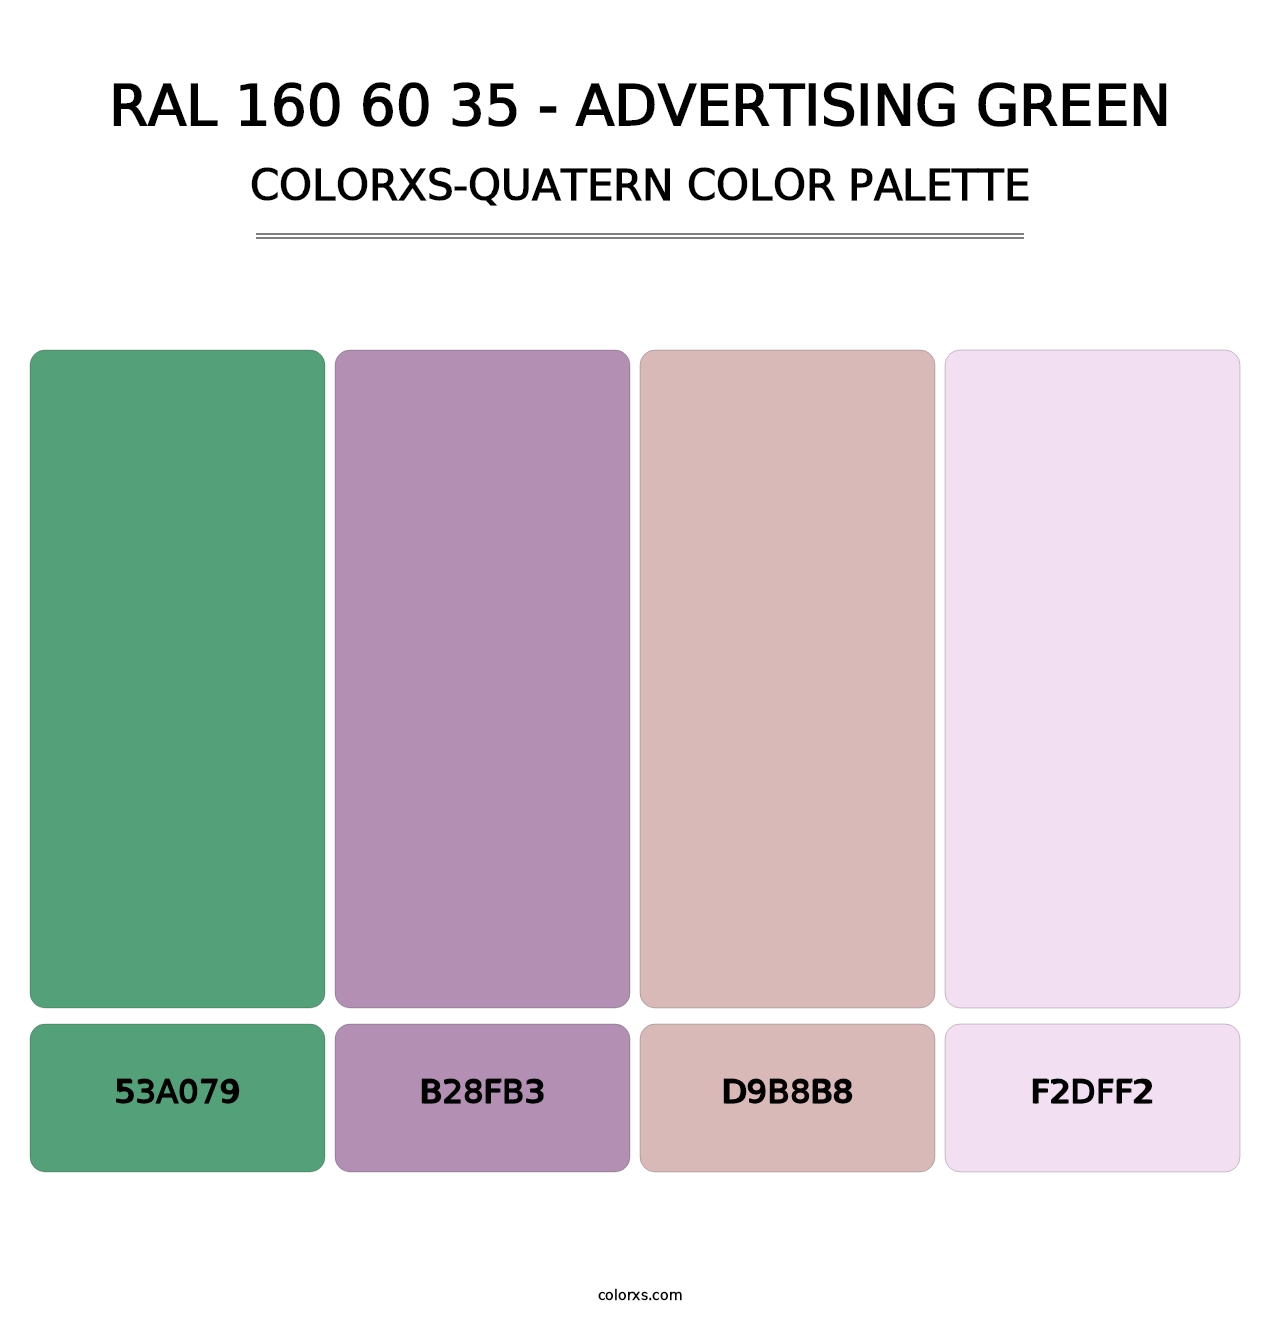 RAL 160 60 35 - Advertising Green - Colorxs Quatern Palette